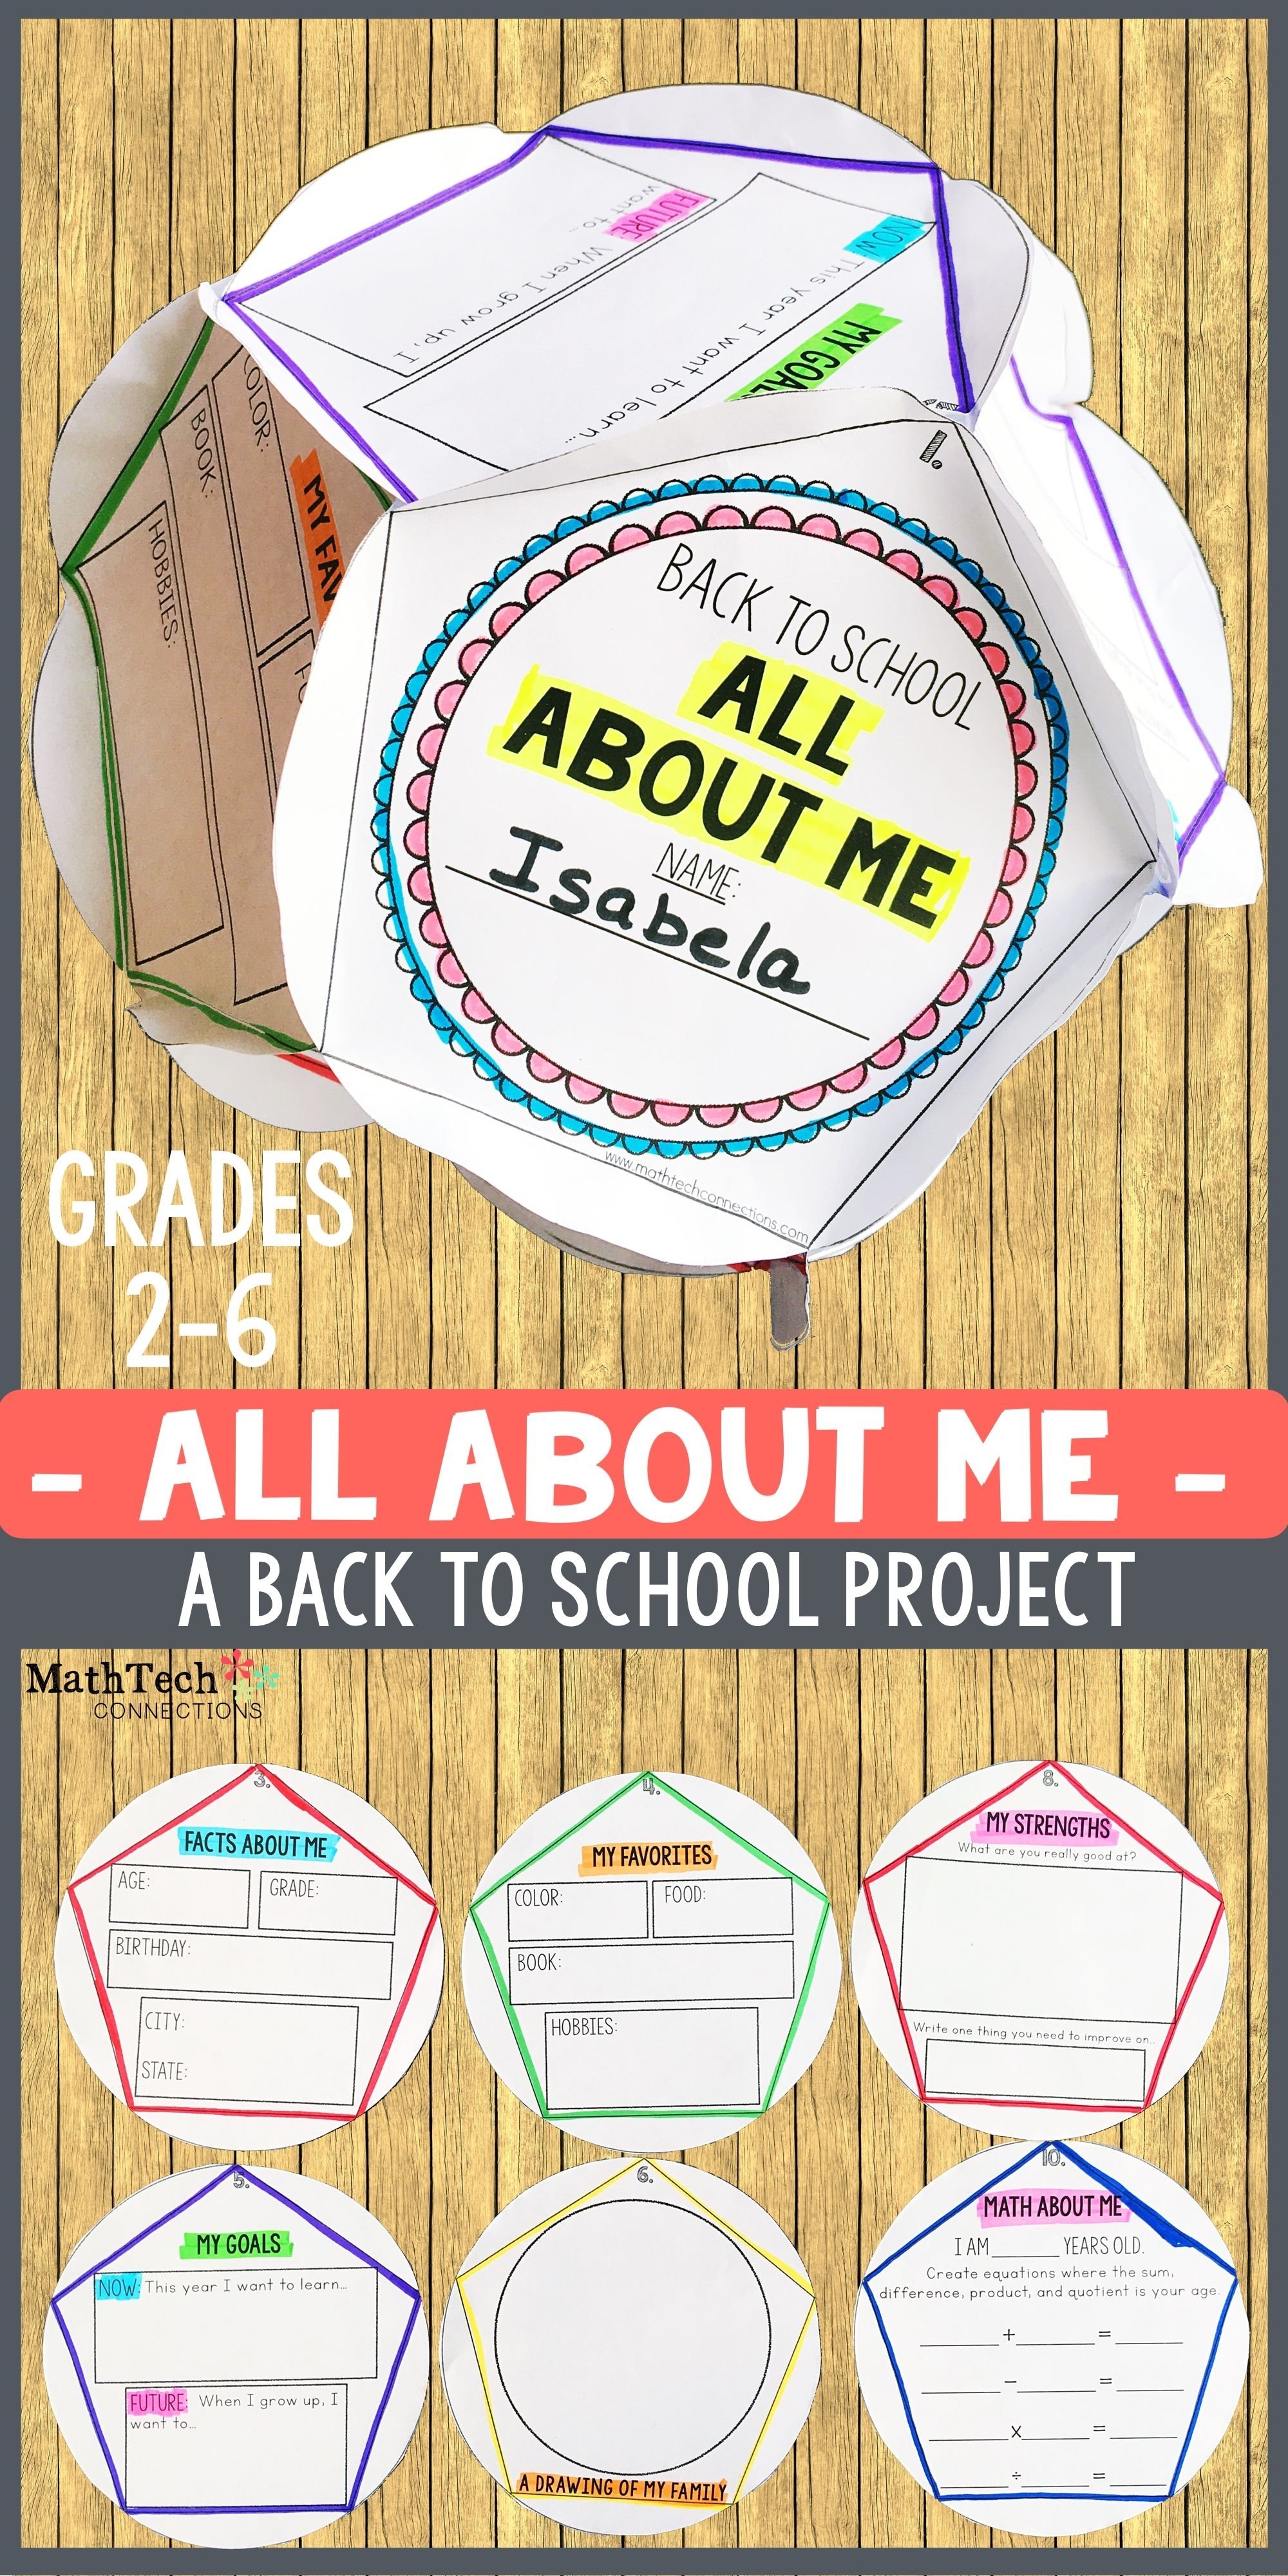 10 Most Recommended All About Me Project Ideas all about me a back to school dodecahedron project classroom 2022